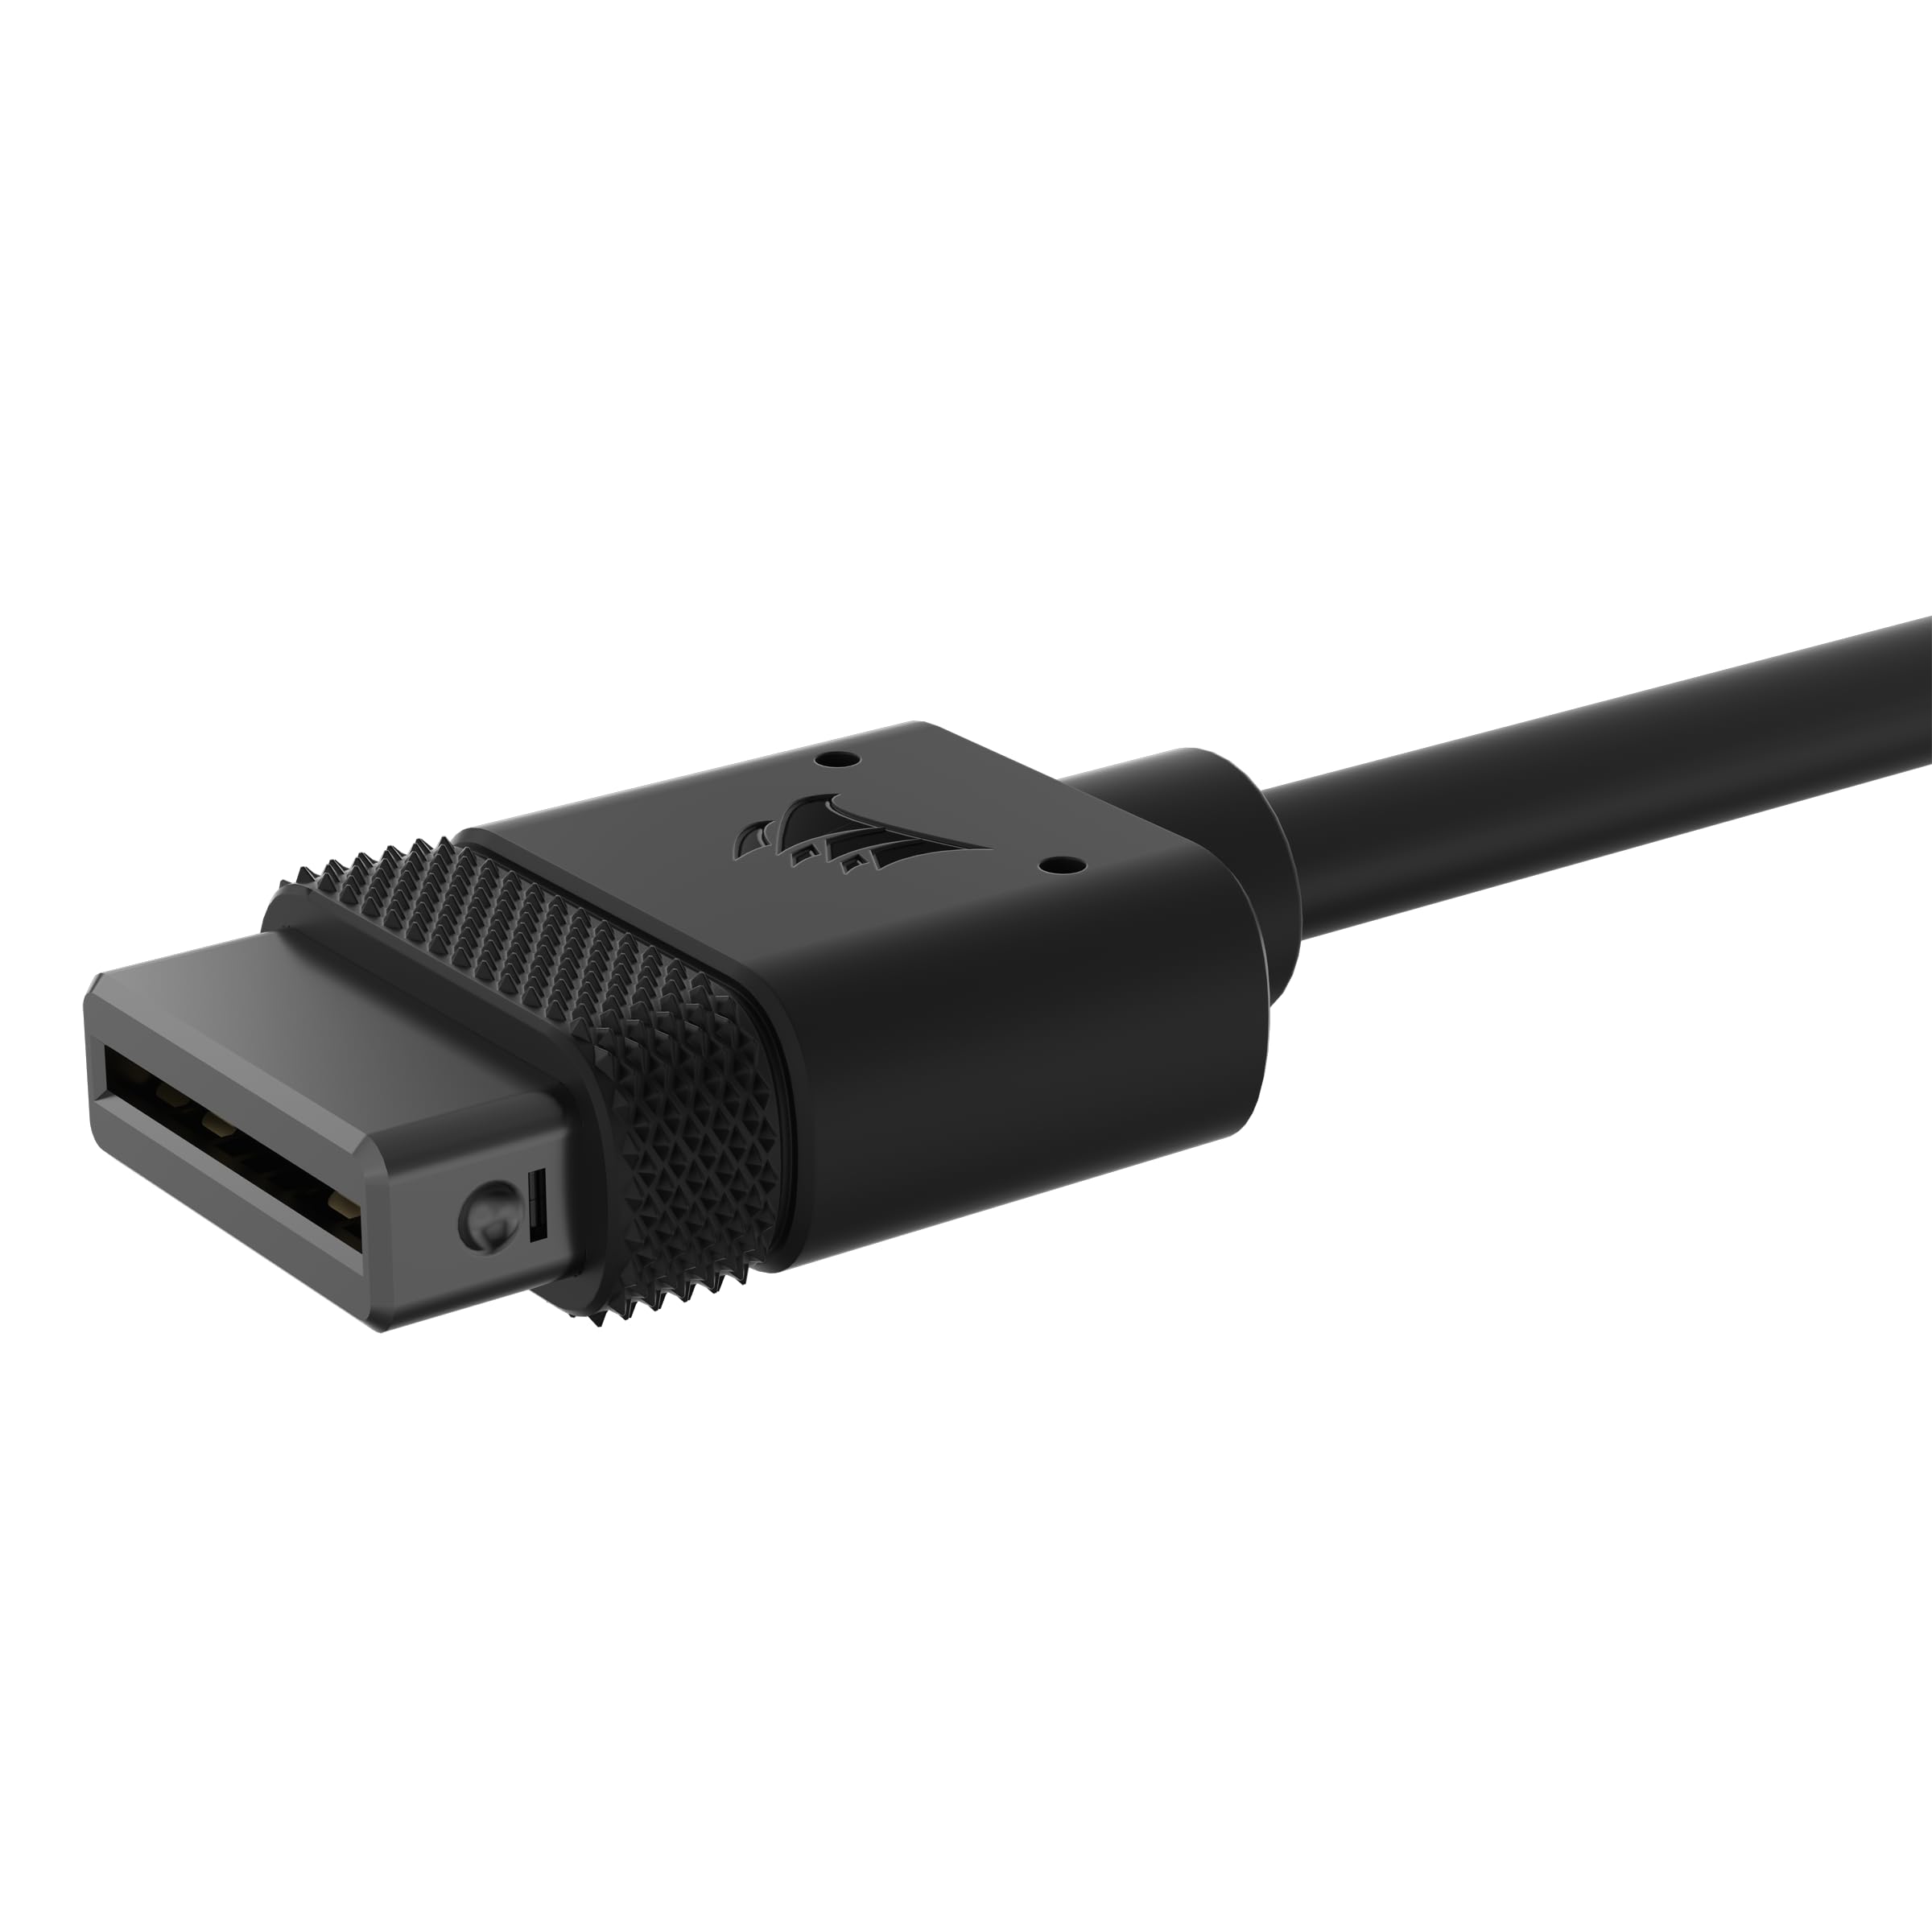 Corsair iCUE Link Cables - 2X 200mm Straight - Black